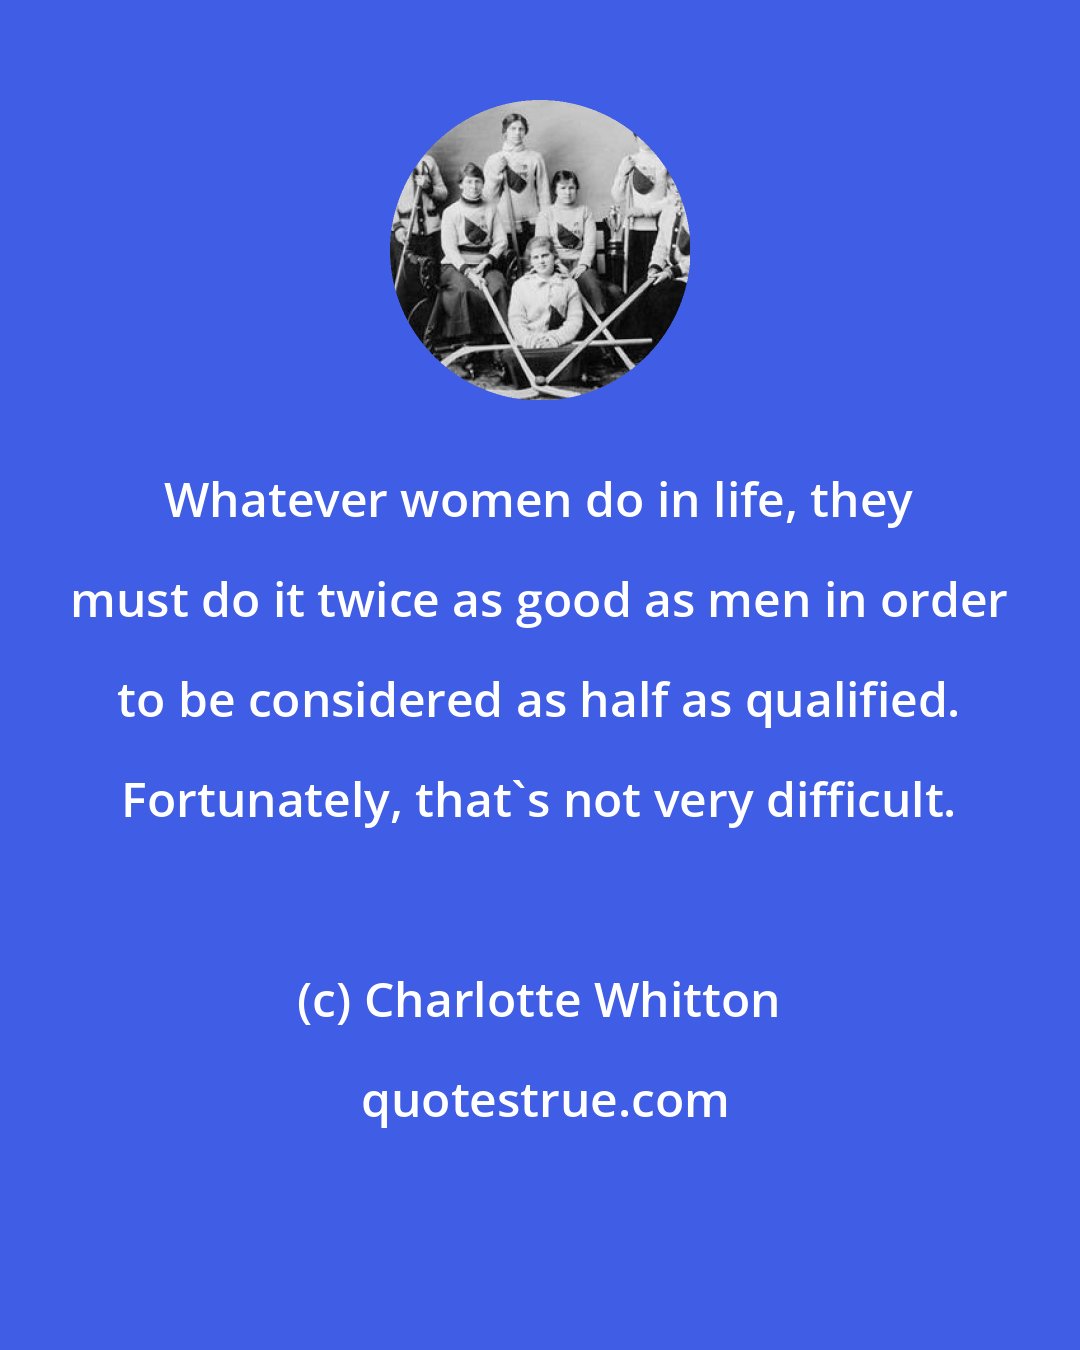 Charlotte Whitton: Whatever women do in life, they must do it twice as good as men in order to be considered as half as qualified. Fortunately, that's not very difficult.